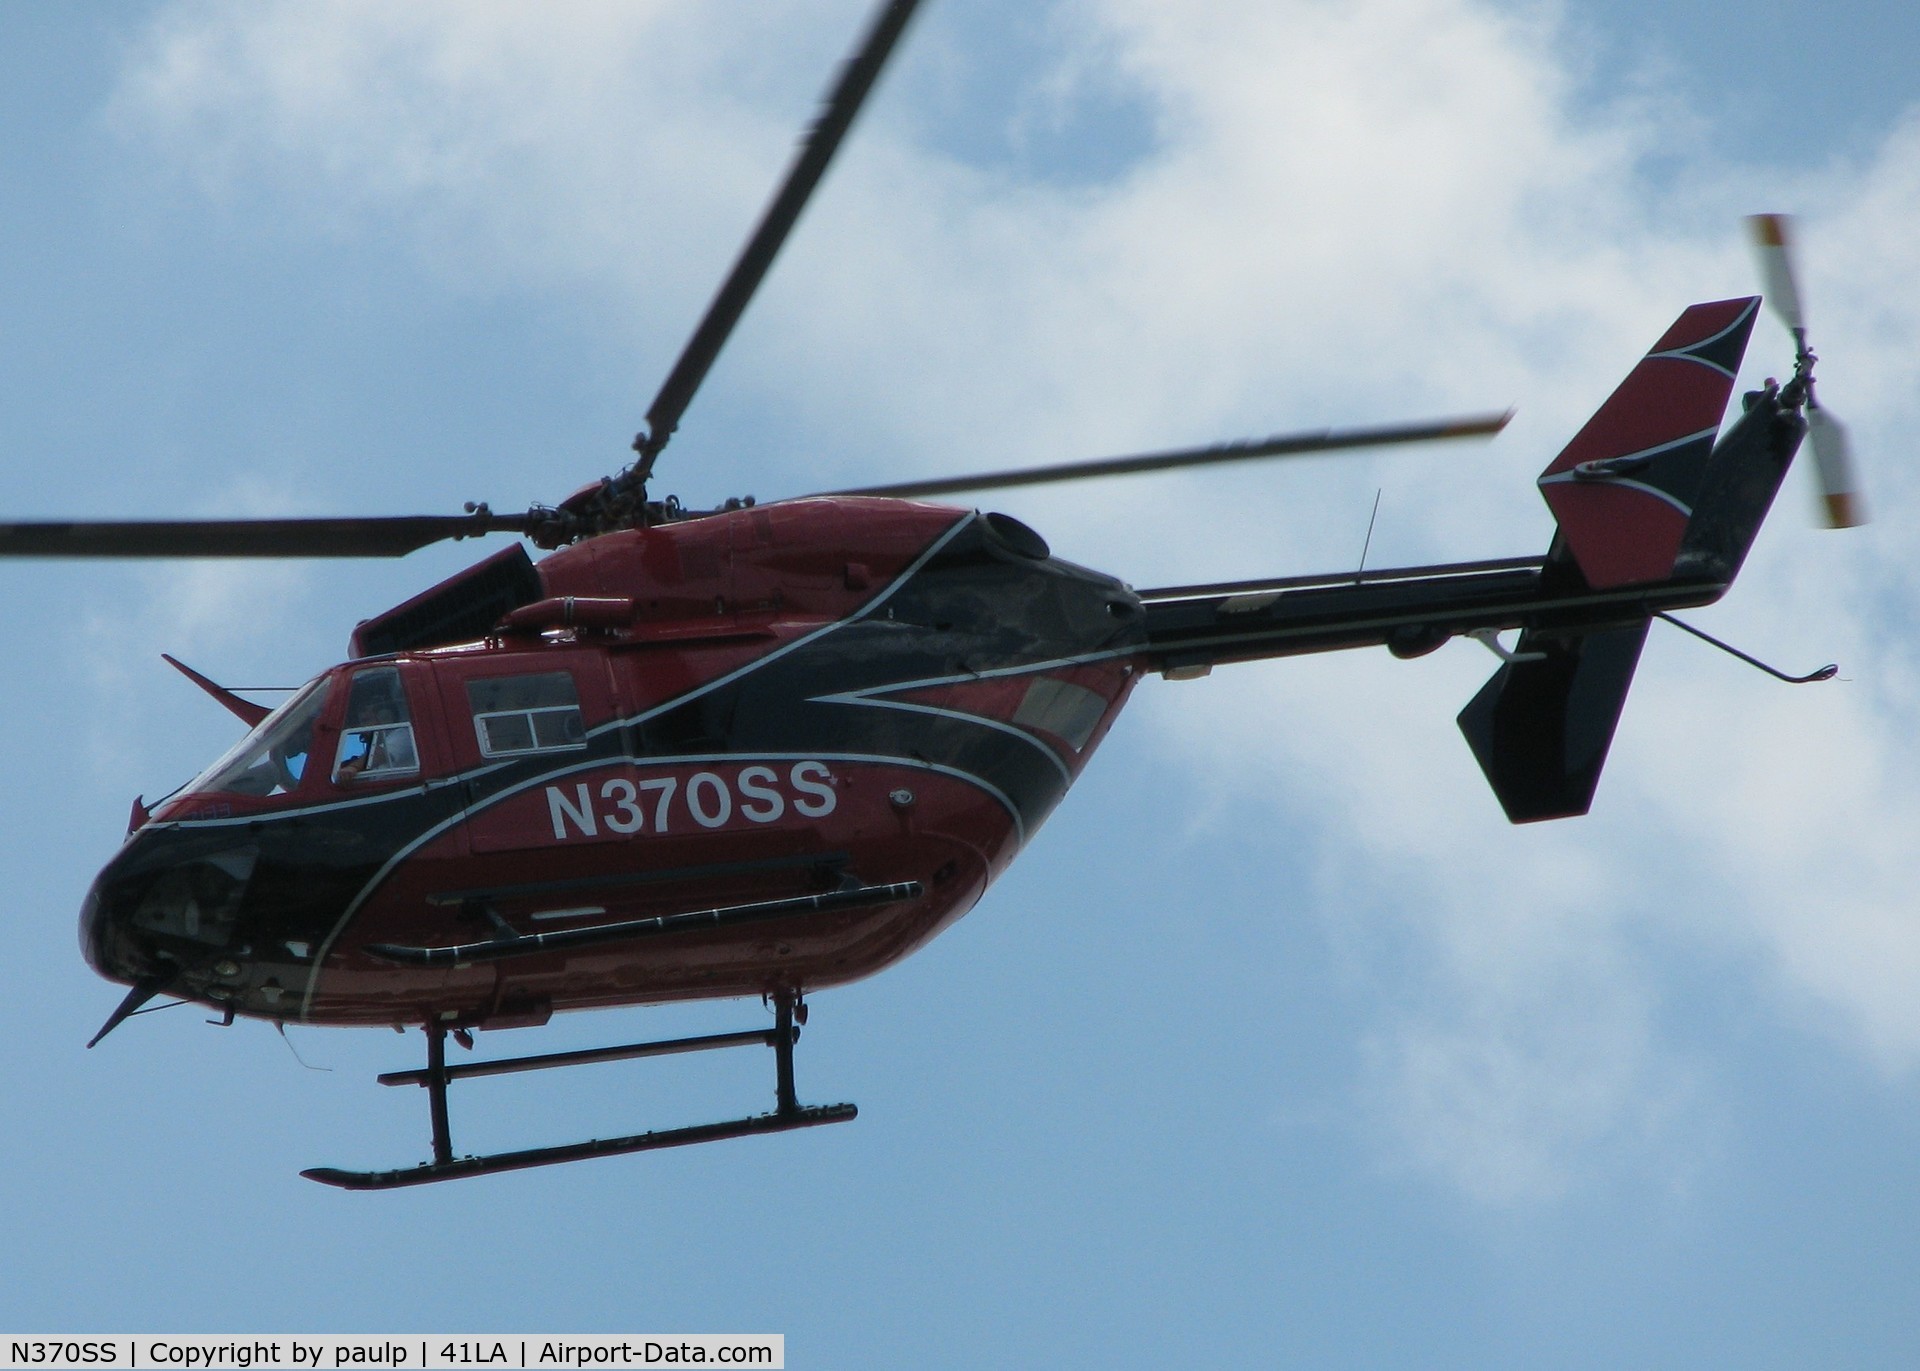 N370SS, 1987 Eurocopter-Kawasaki BK-117B-2 C/N 7133, Taking off from Metro Aviation near the Downtown Shreveport airport.